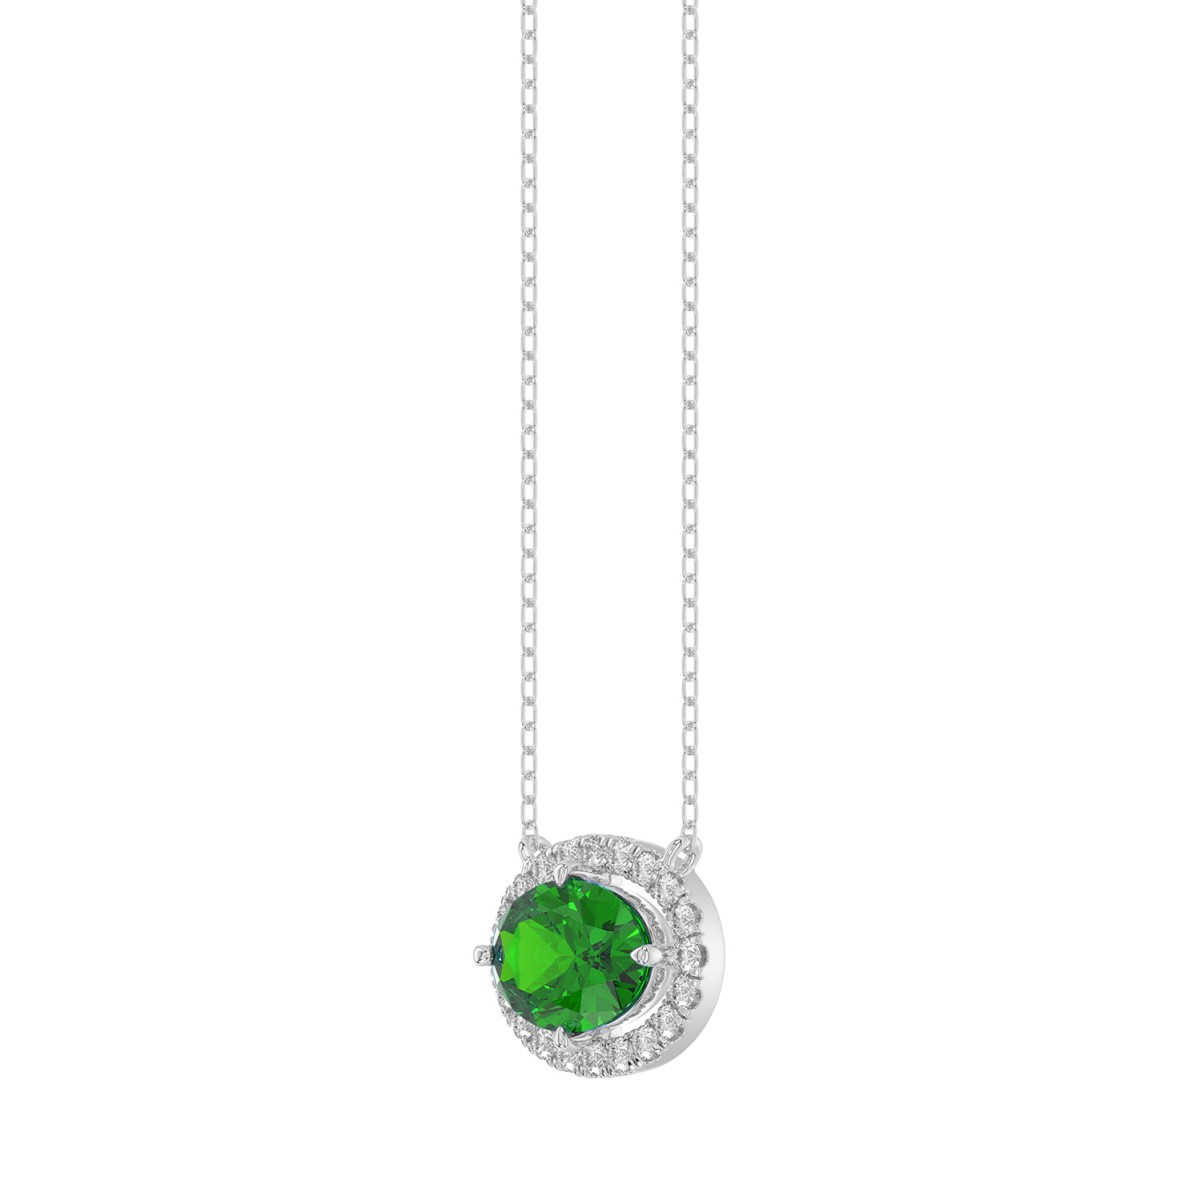 18K WHITE GOLD 1 1/6CT ROUND/OVAL DIAMOND LADIES NECKLACE(COLOR STONE OVAL GREEN EMERALD DIAMOND 1CT)